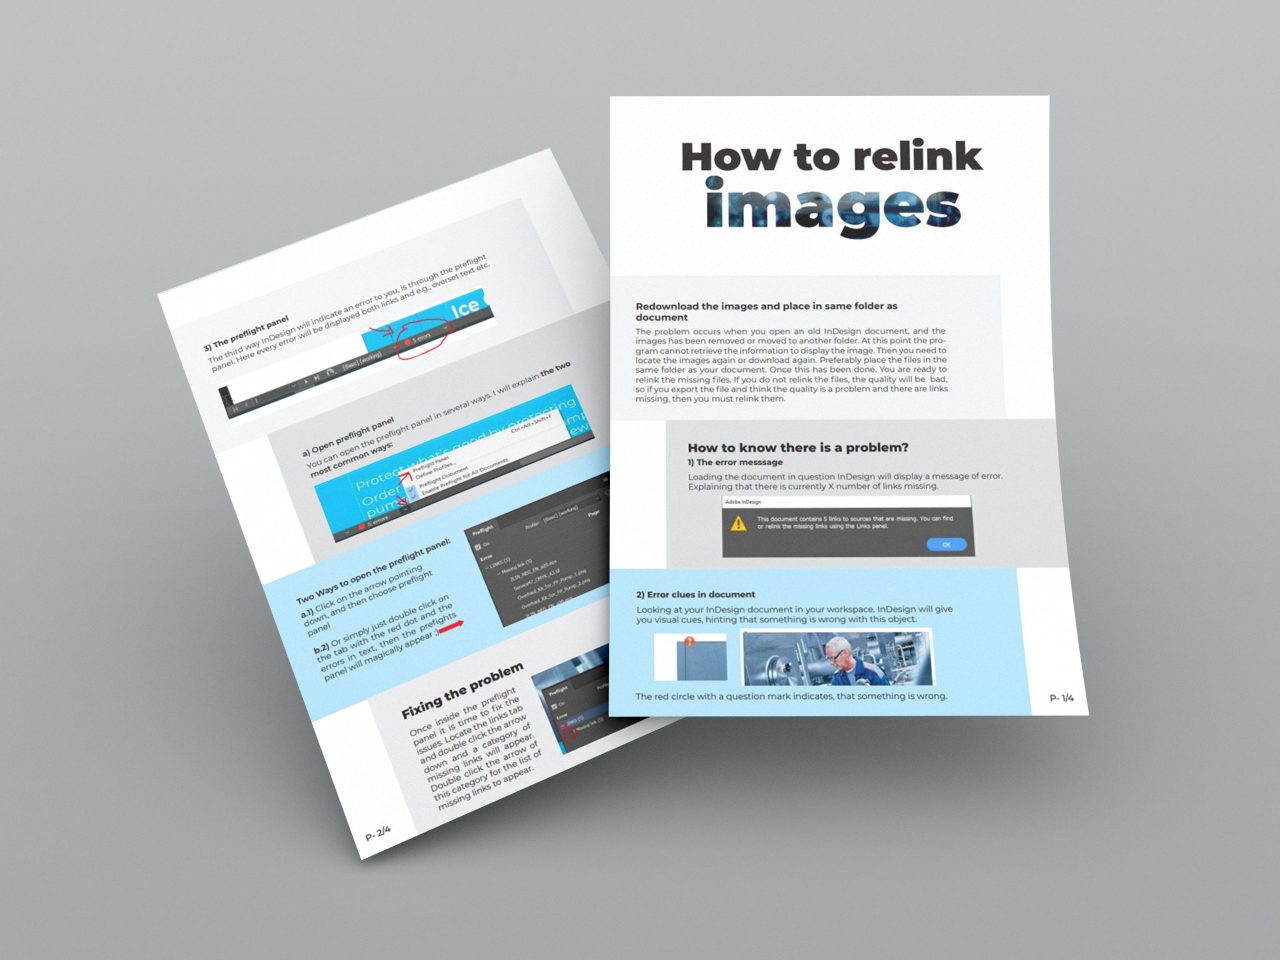 Tetra Pak Guide: How to relink images in InDesign